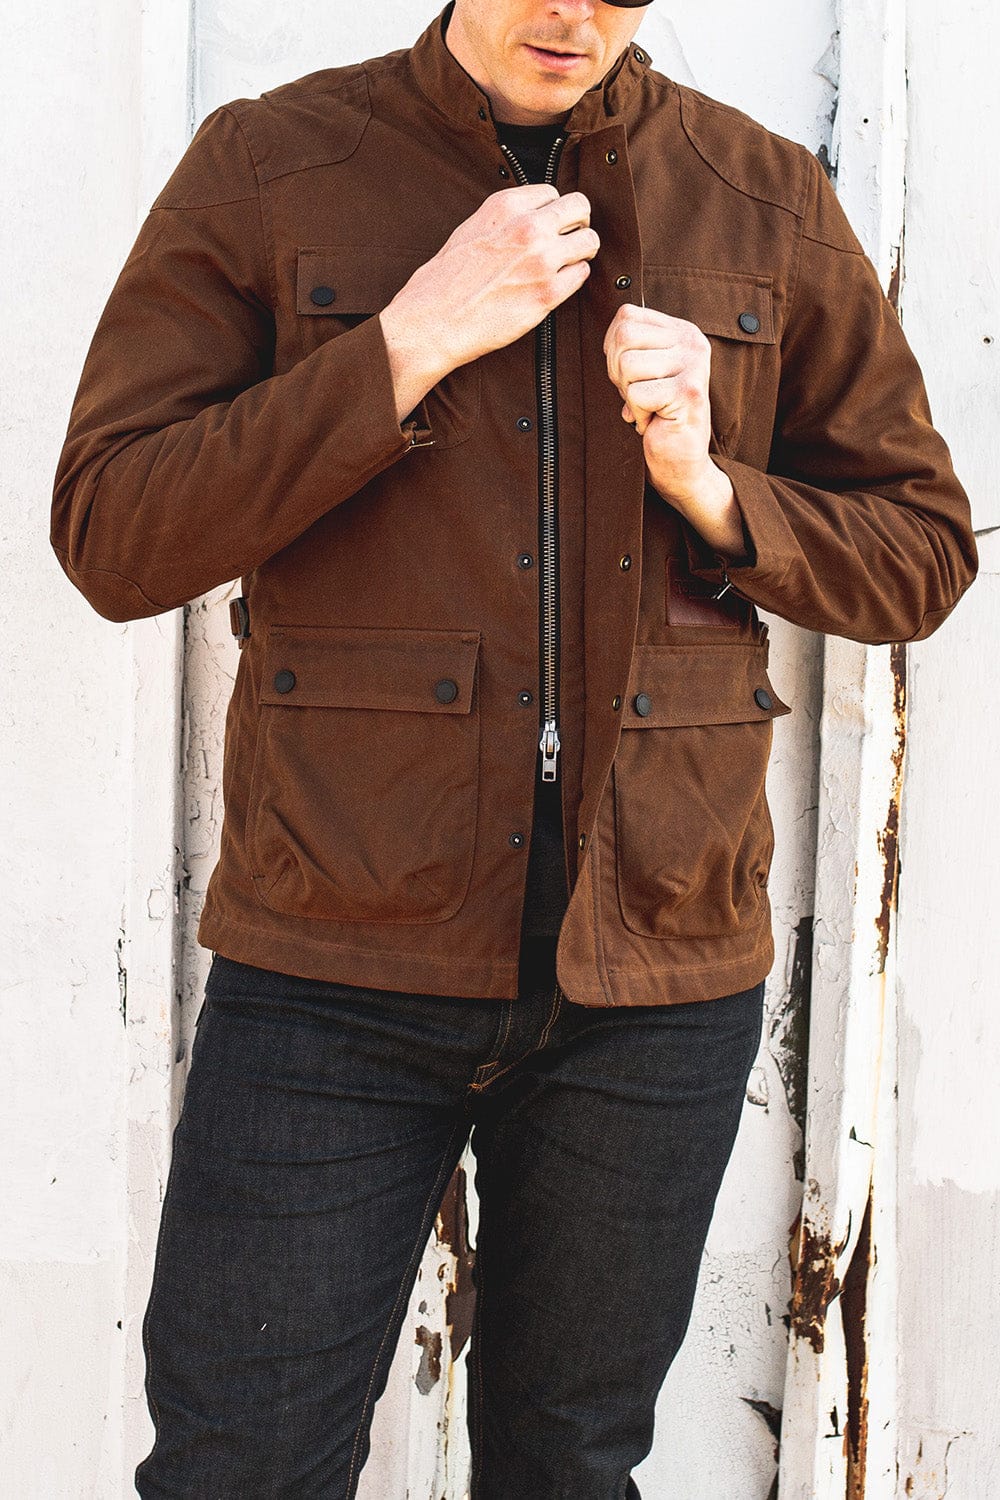 The McCoy Waxed Canvas Protective Tobacco D3O® and Motorwear Brown. for Shoulder - Elbow Armor Back, Jacket Pockets 